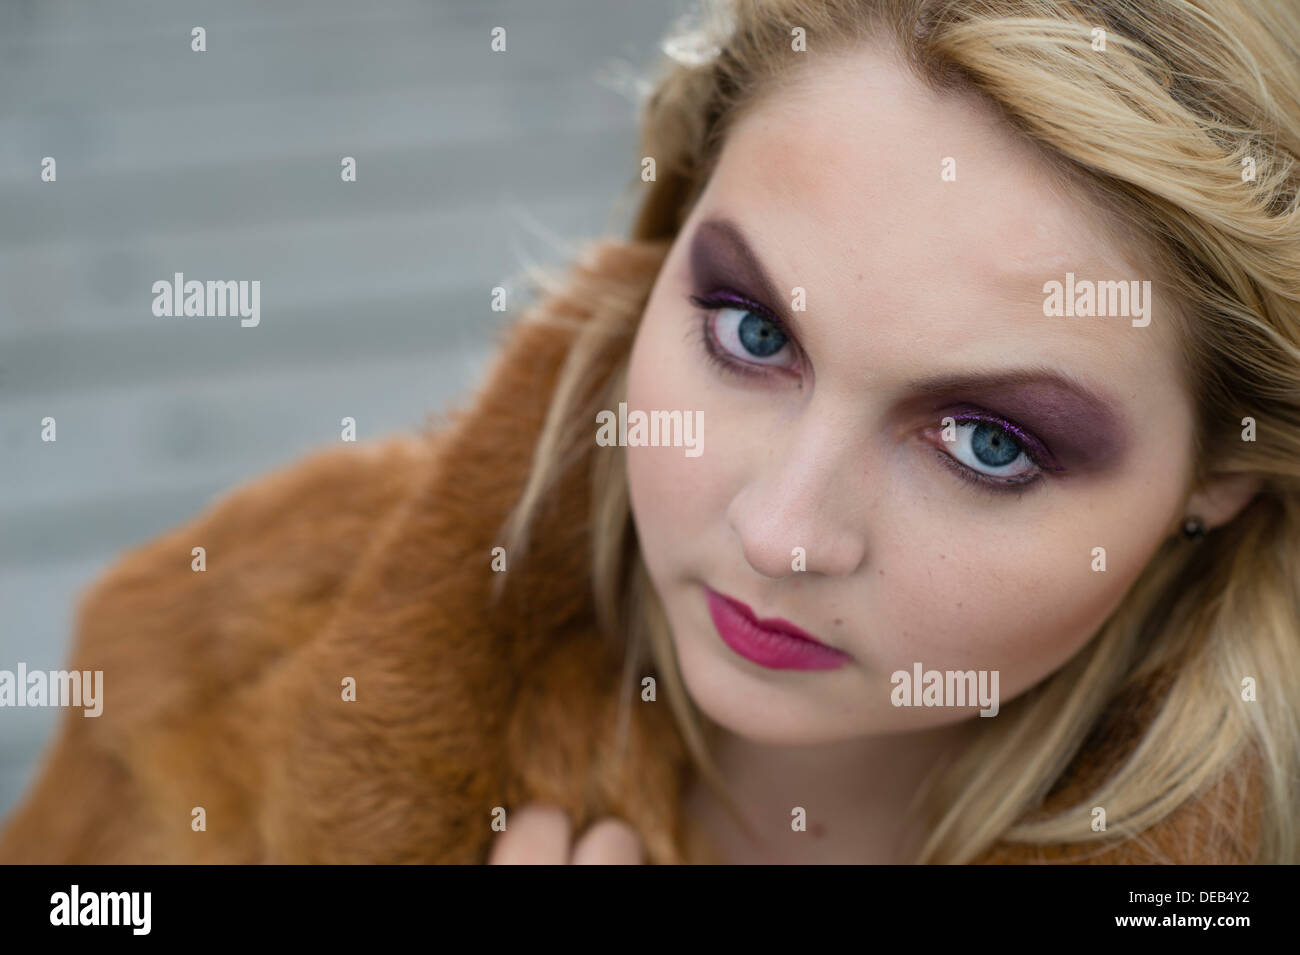 a young blond blonde woman teenage girl wearing a fur coat looking at camera with big eyes, UK Stock Photo